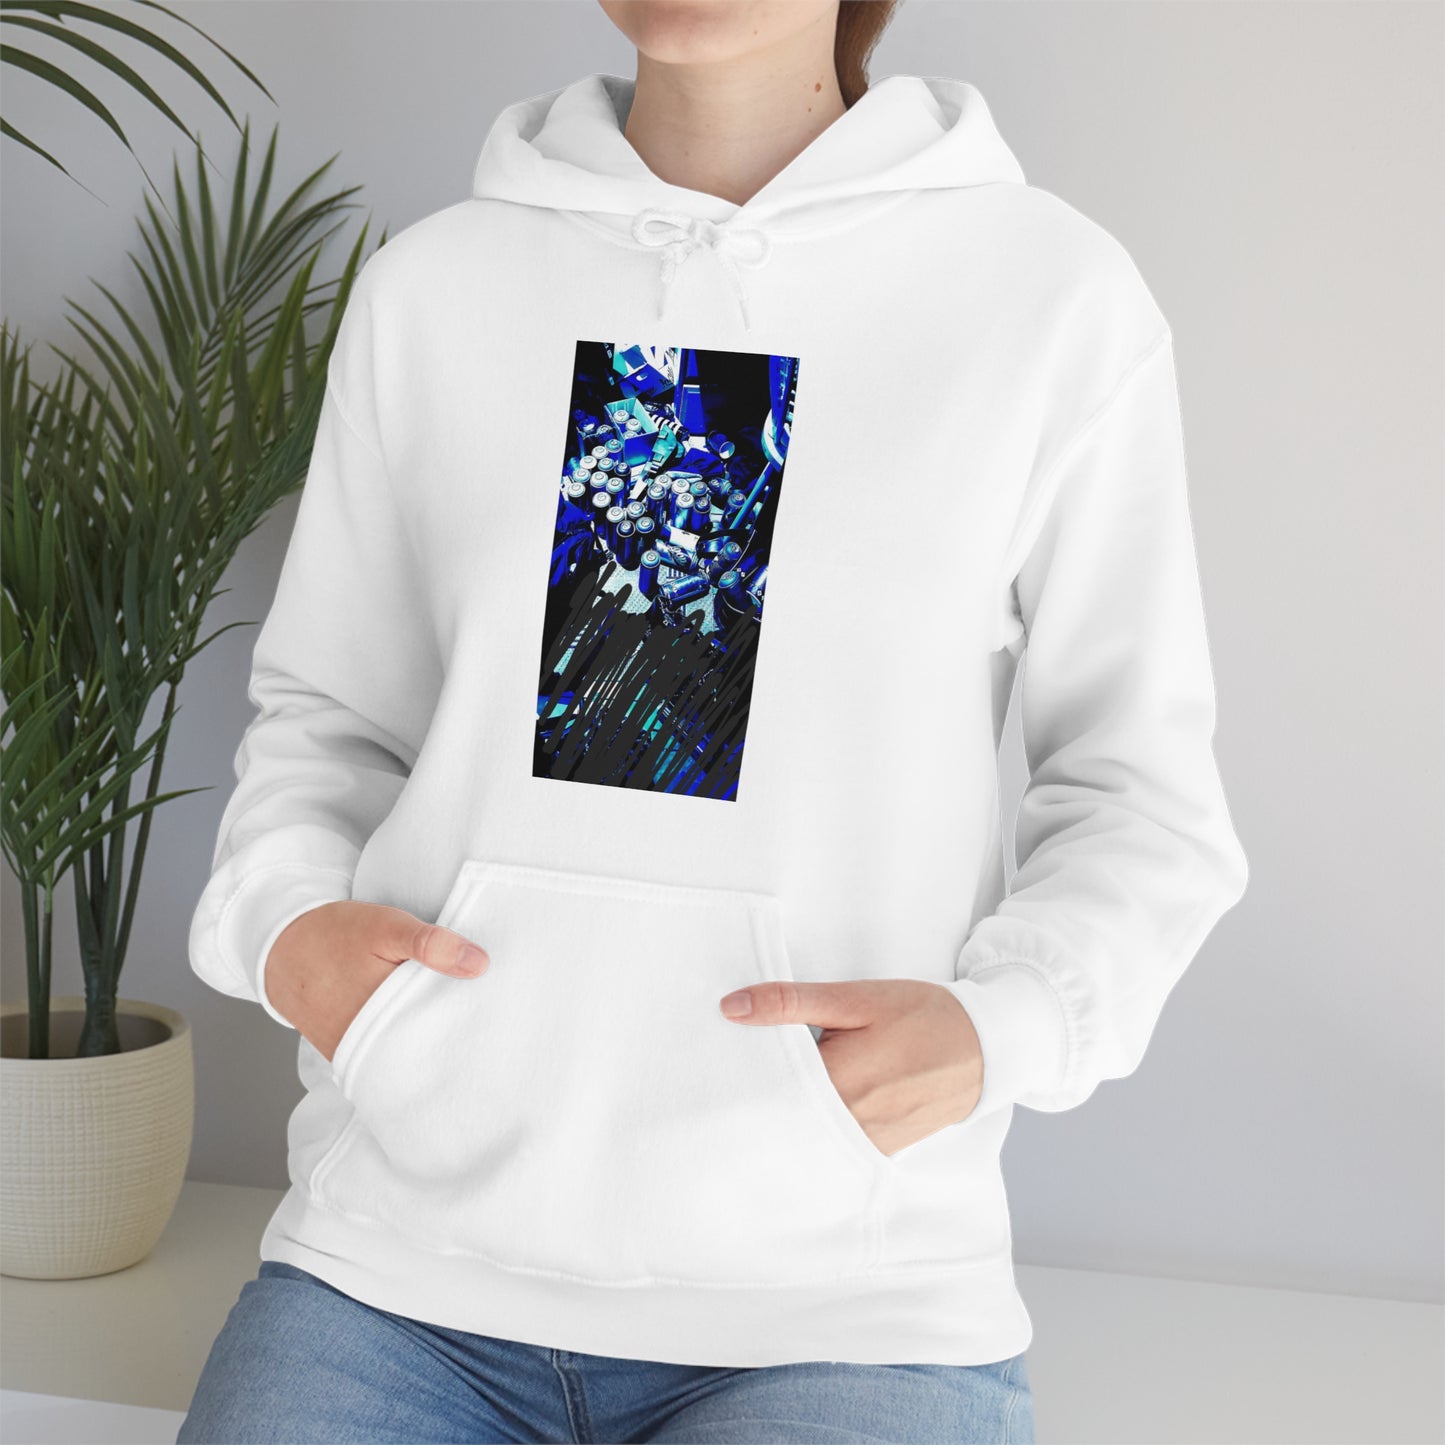 Late night antics hoody(image switched)